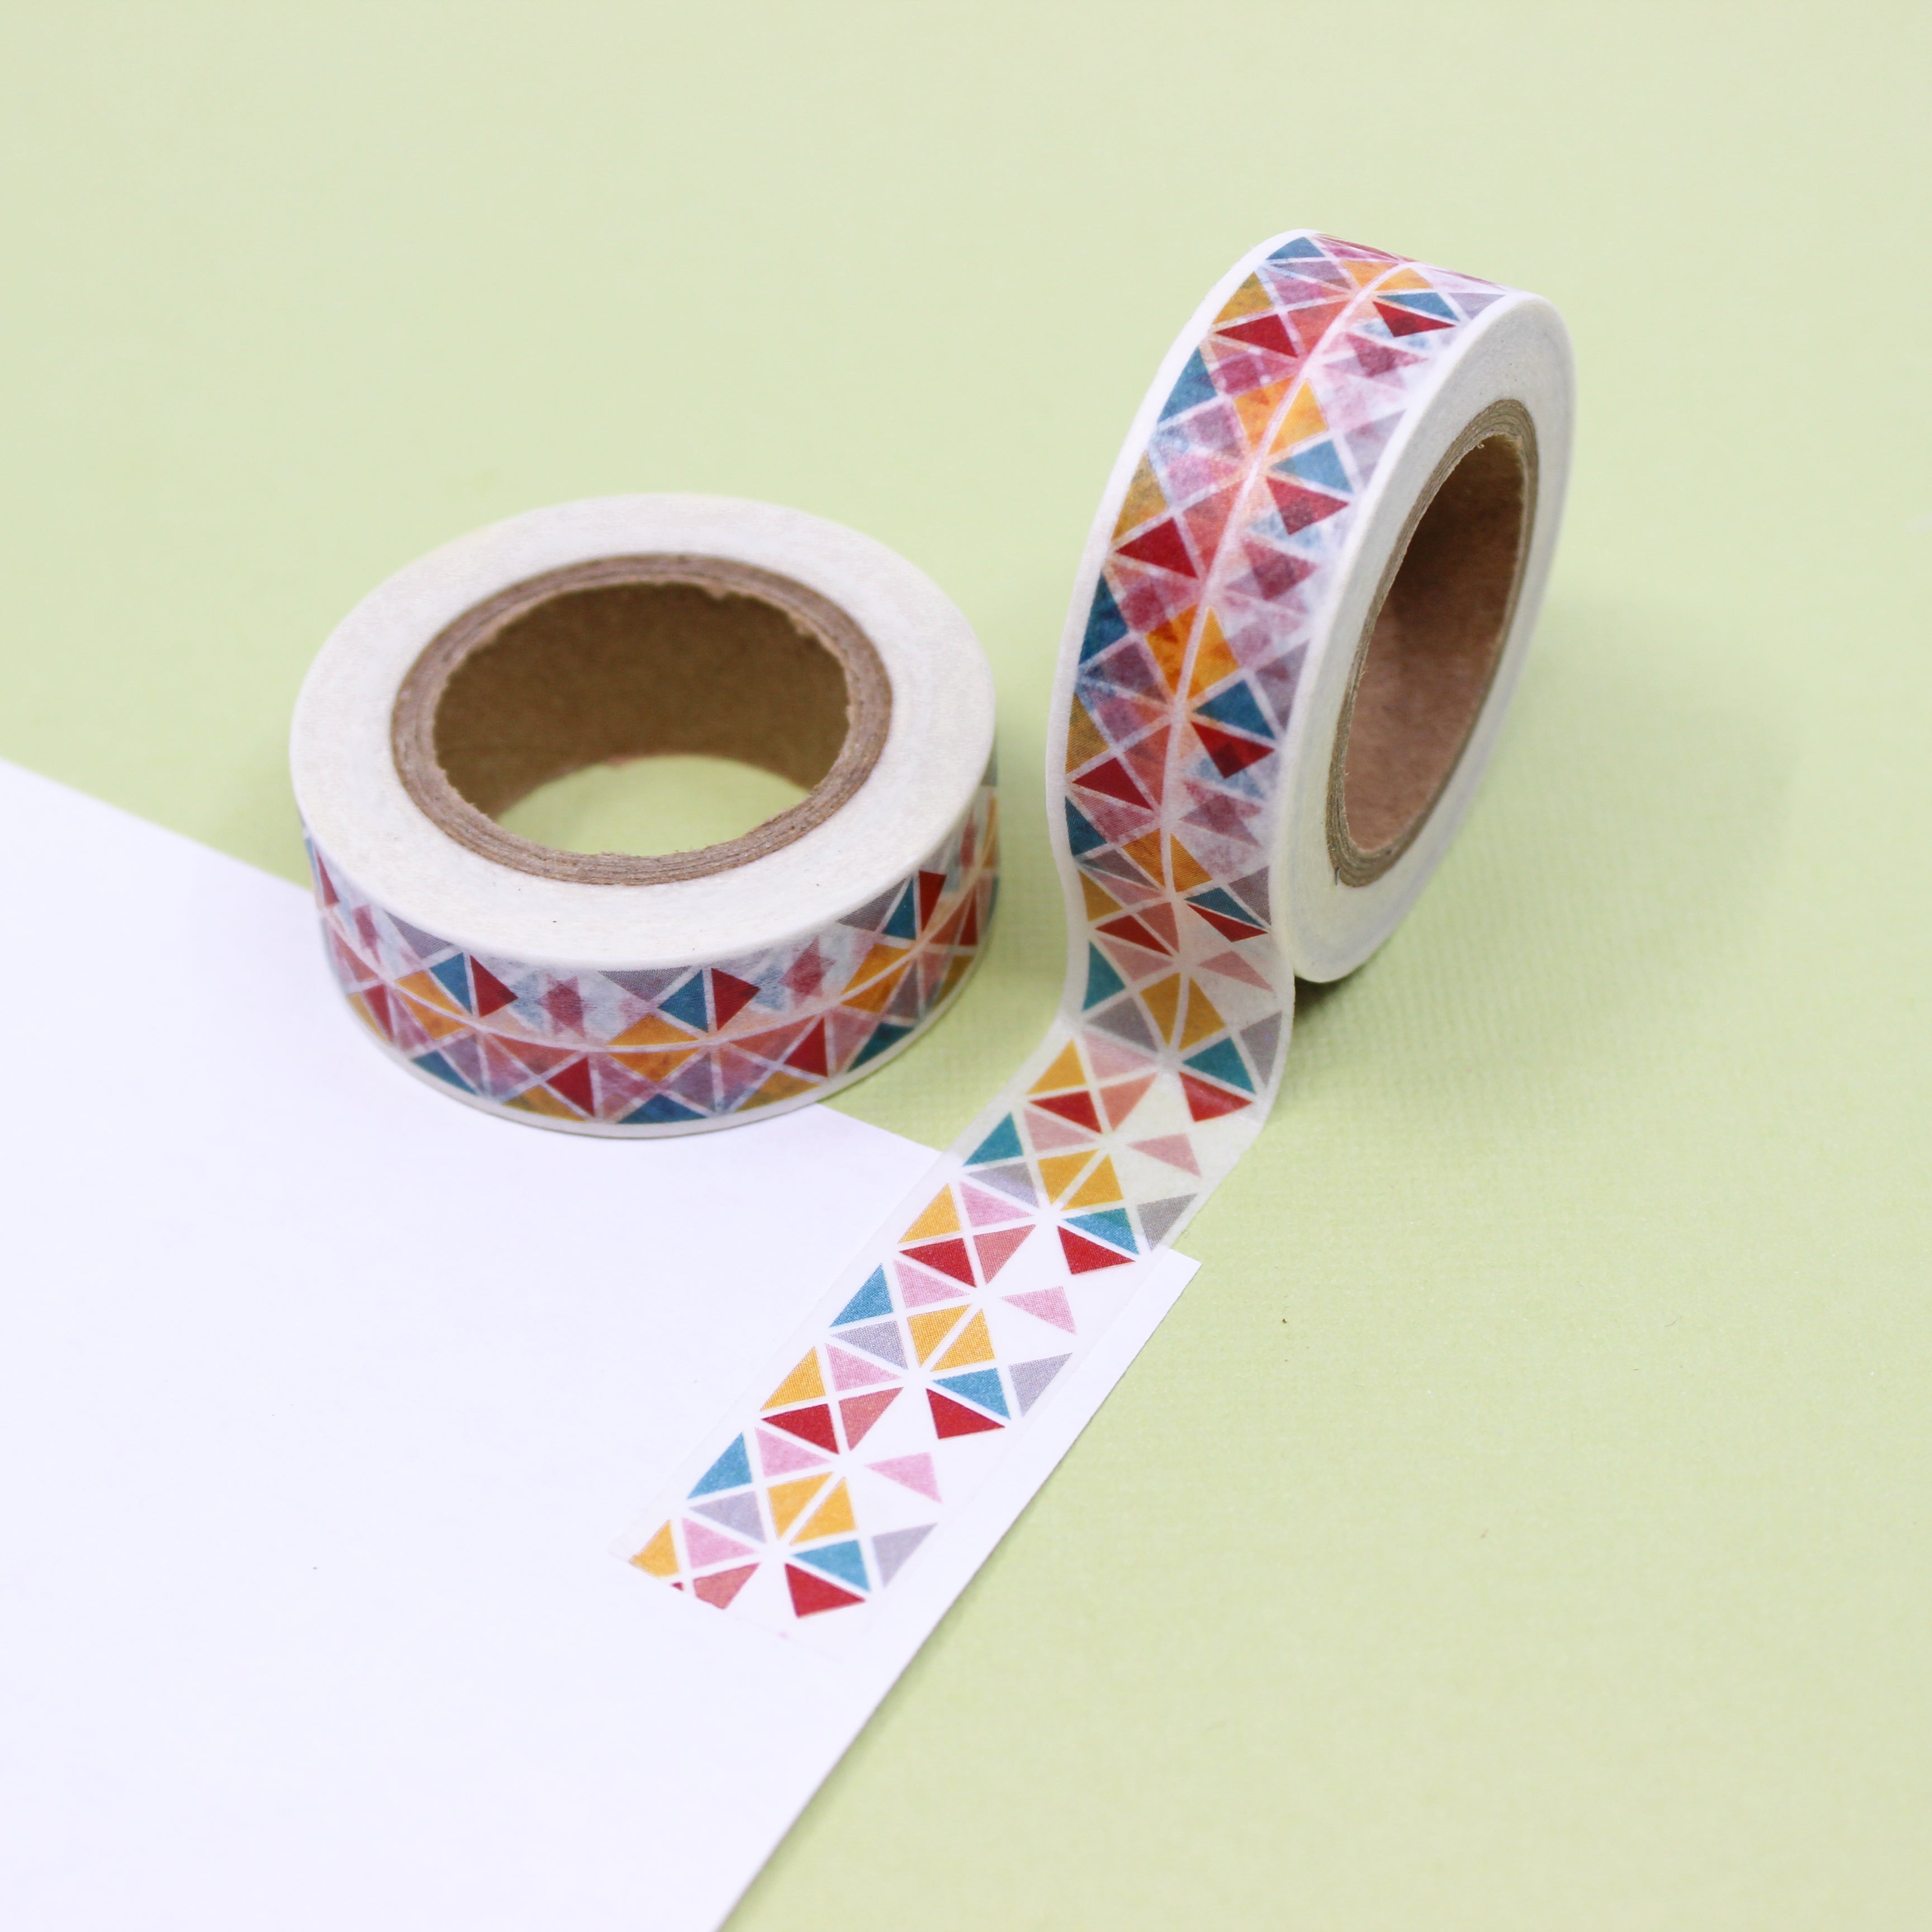 This is a grid triangle pattern washi tape from BBB Supplies Craft Shop